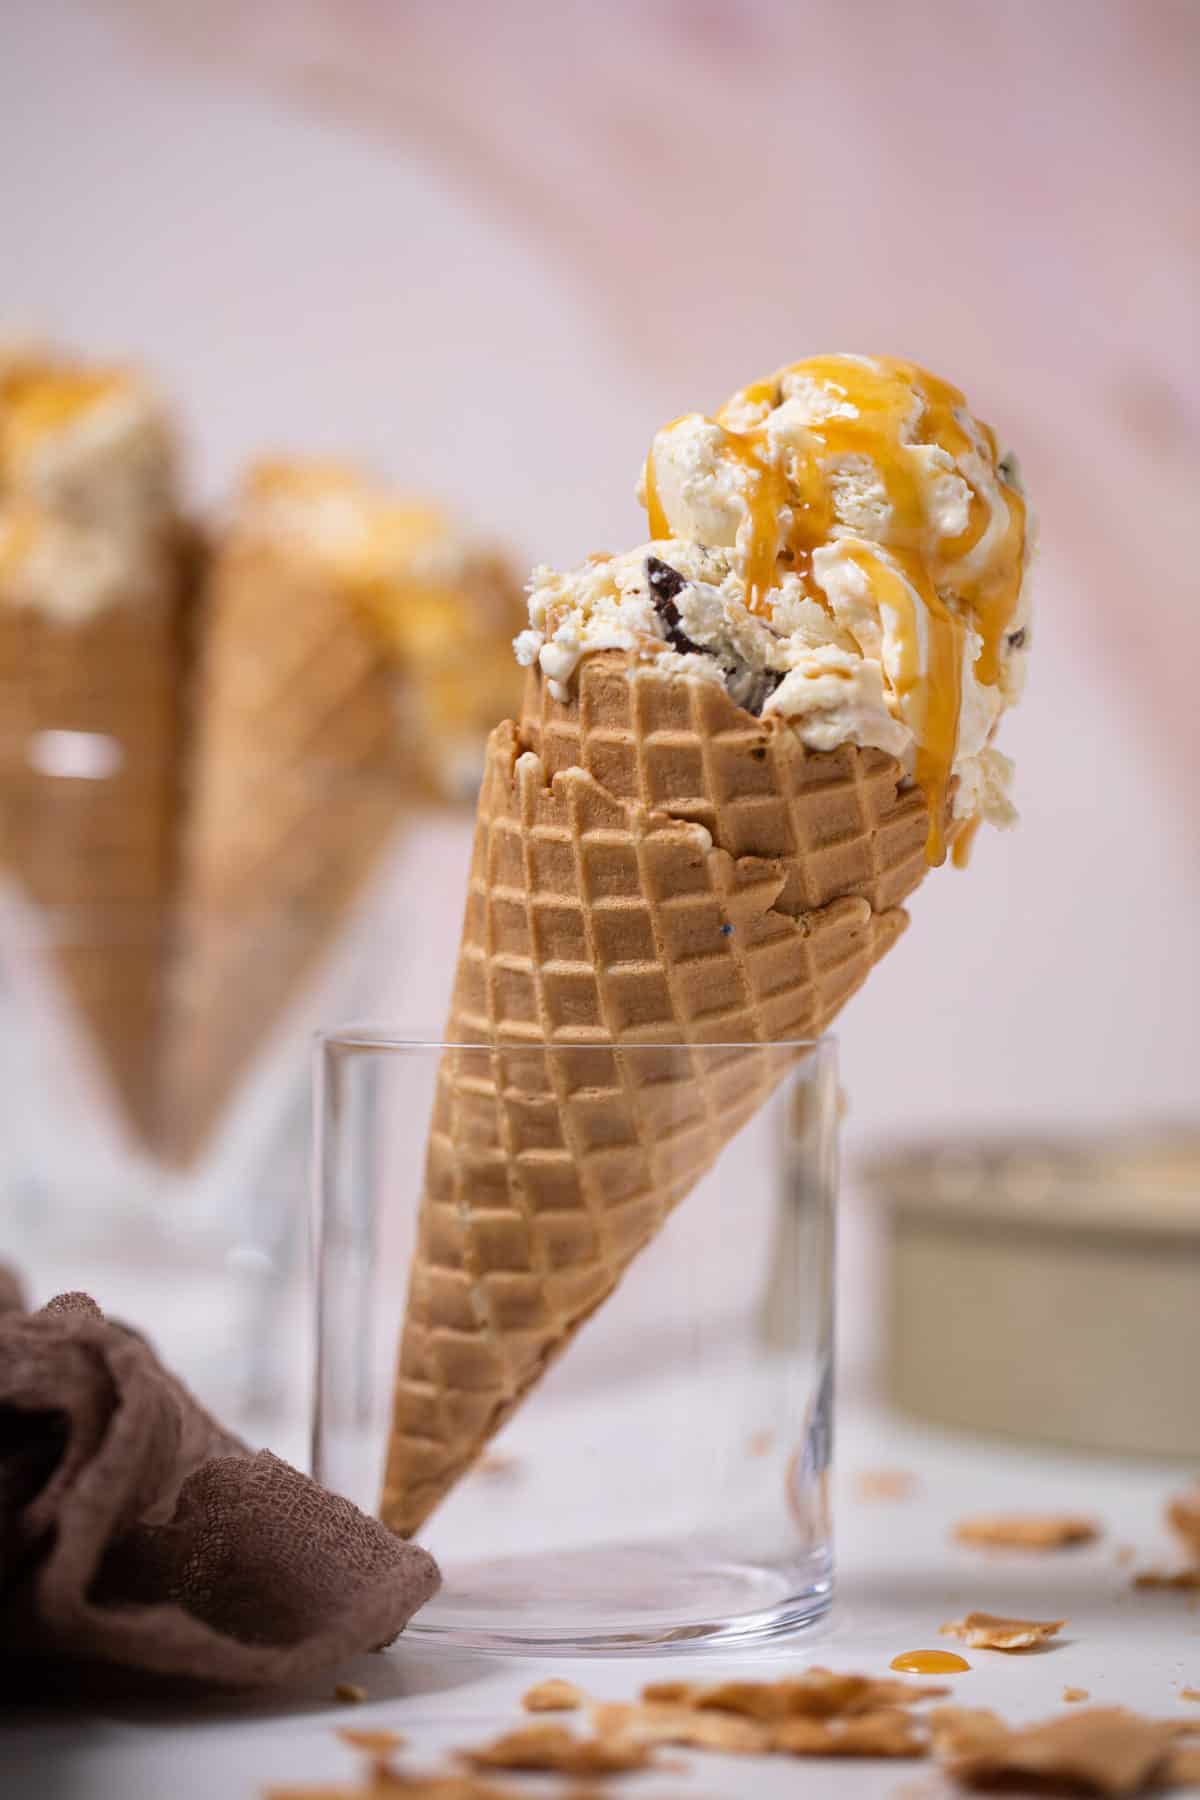 https://www.orchidsandsweettea.com/wp-content/uploads/2018/03/Caramel-Ice-Cream-5-of-7-scaled.jpg